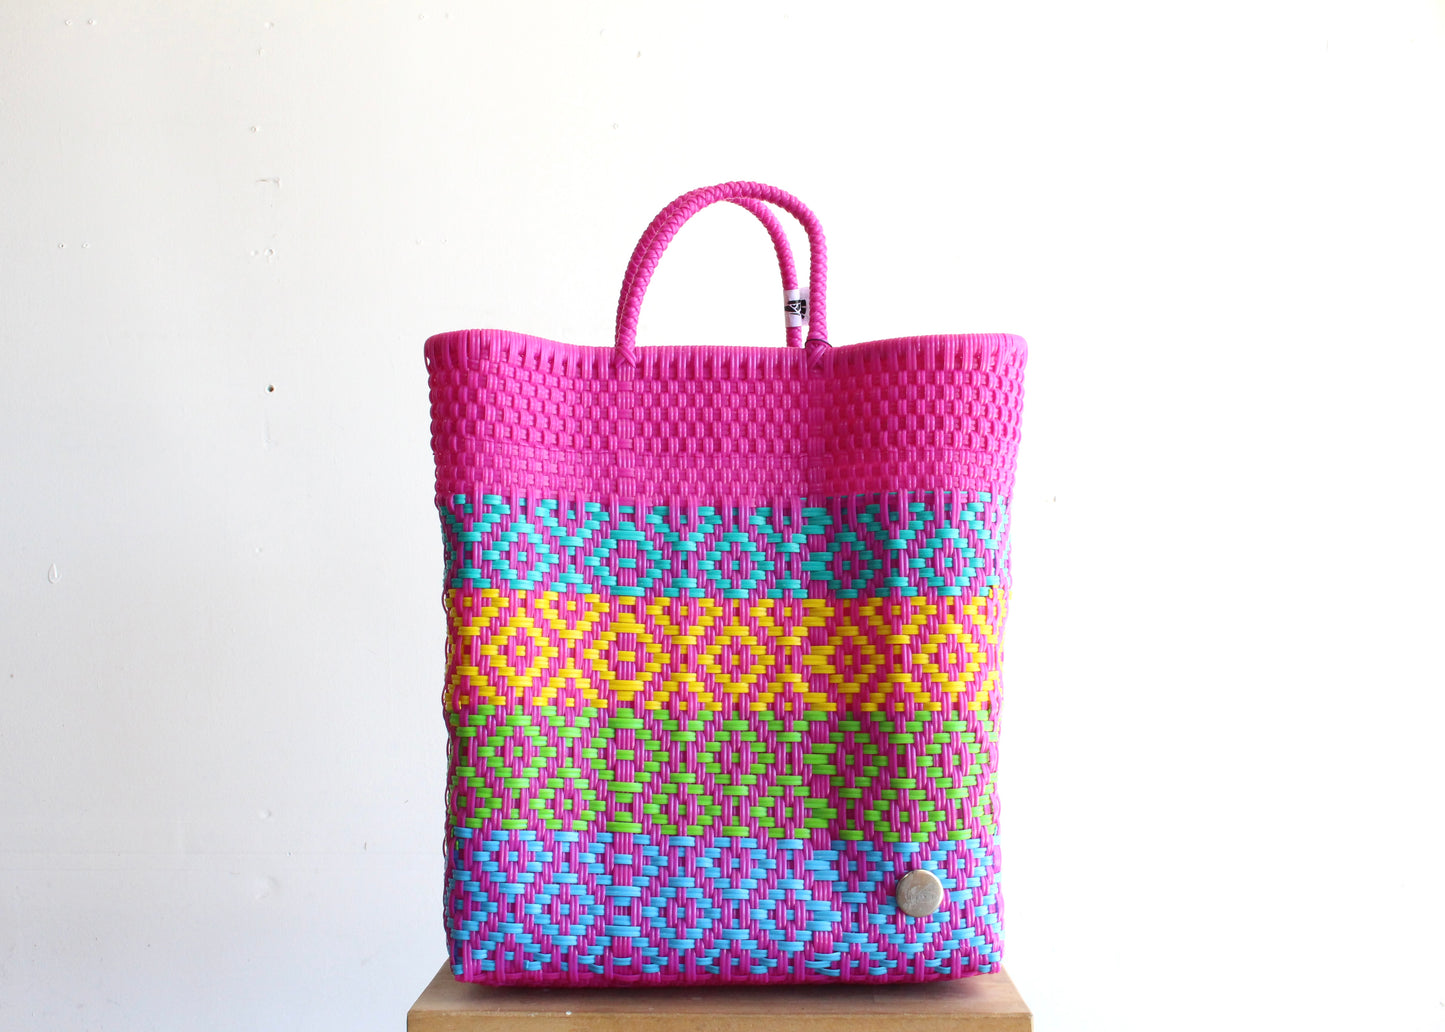 Hot Pink & Colors handwoven Mexican Tote by MexiMexi